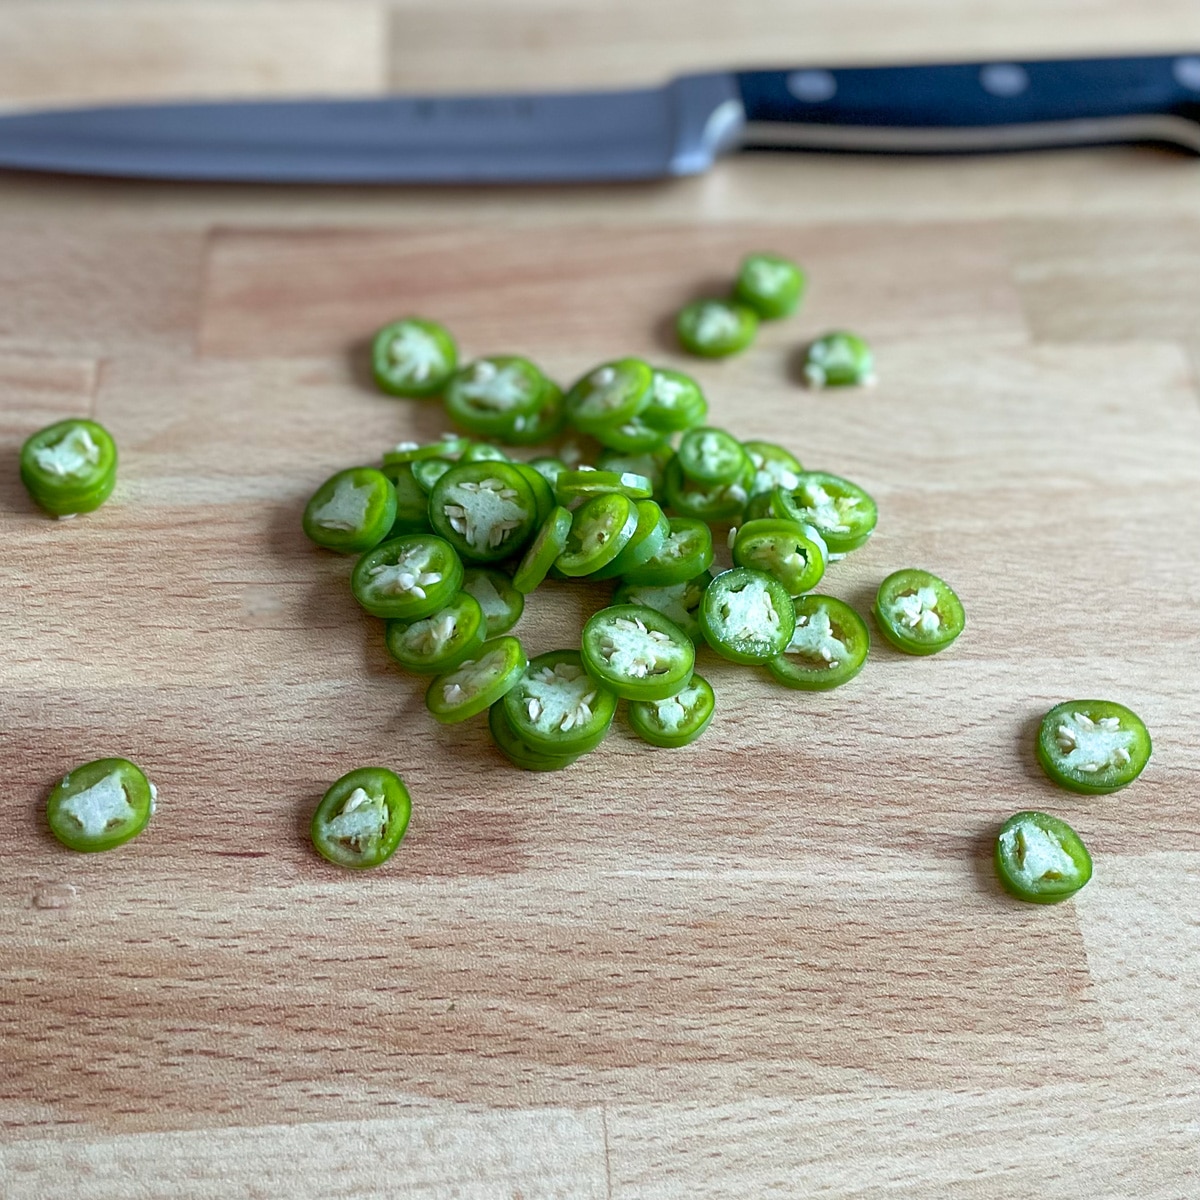 Sliced serrano peppers sit on a wooden cutting board with a kitchen knife in the background.